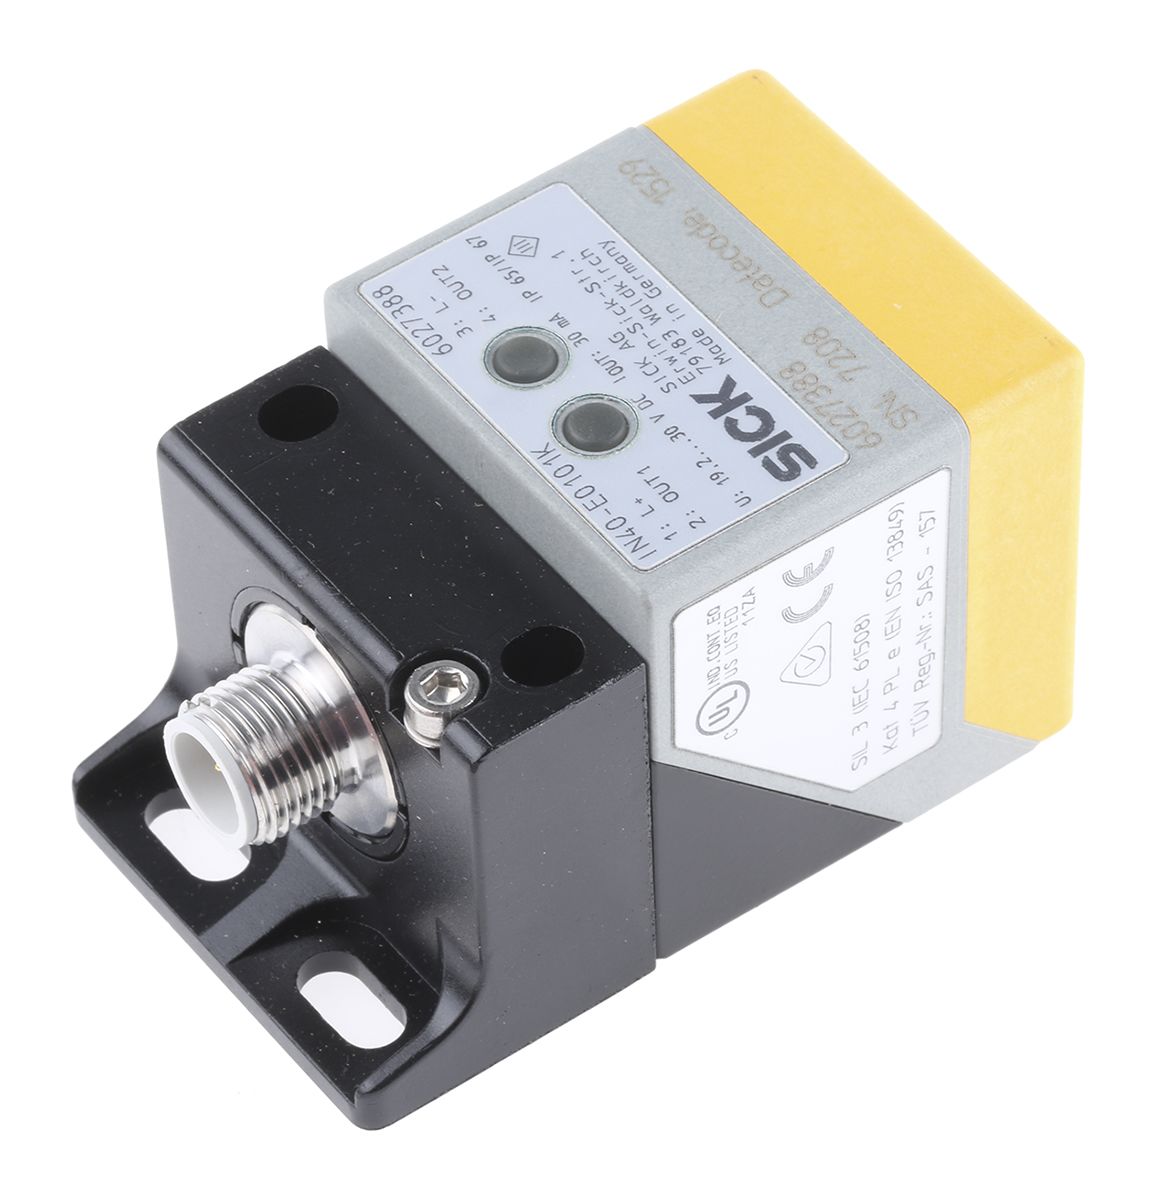 Sick IN4000 Series Inductive Non-Contact Safety Switch, 24V dc, Plastic Housing, 2NO, M12